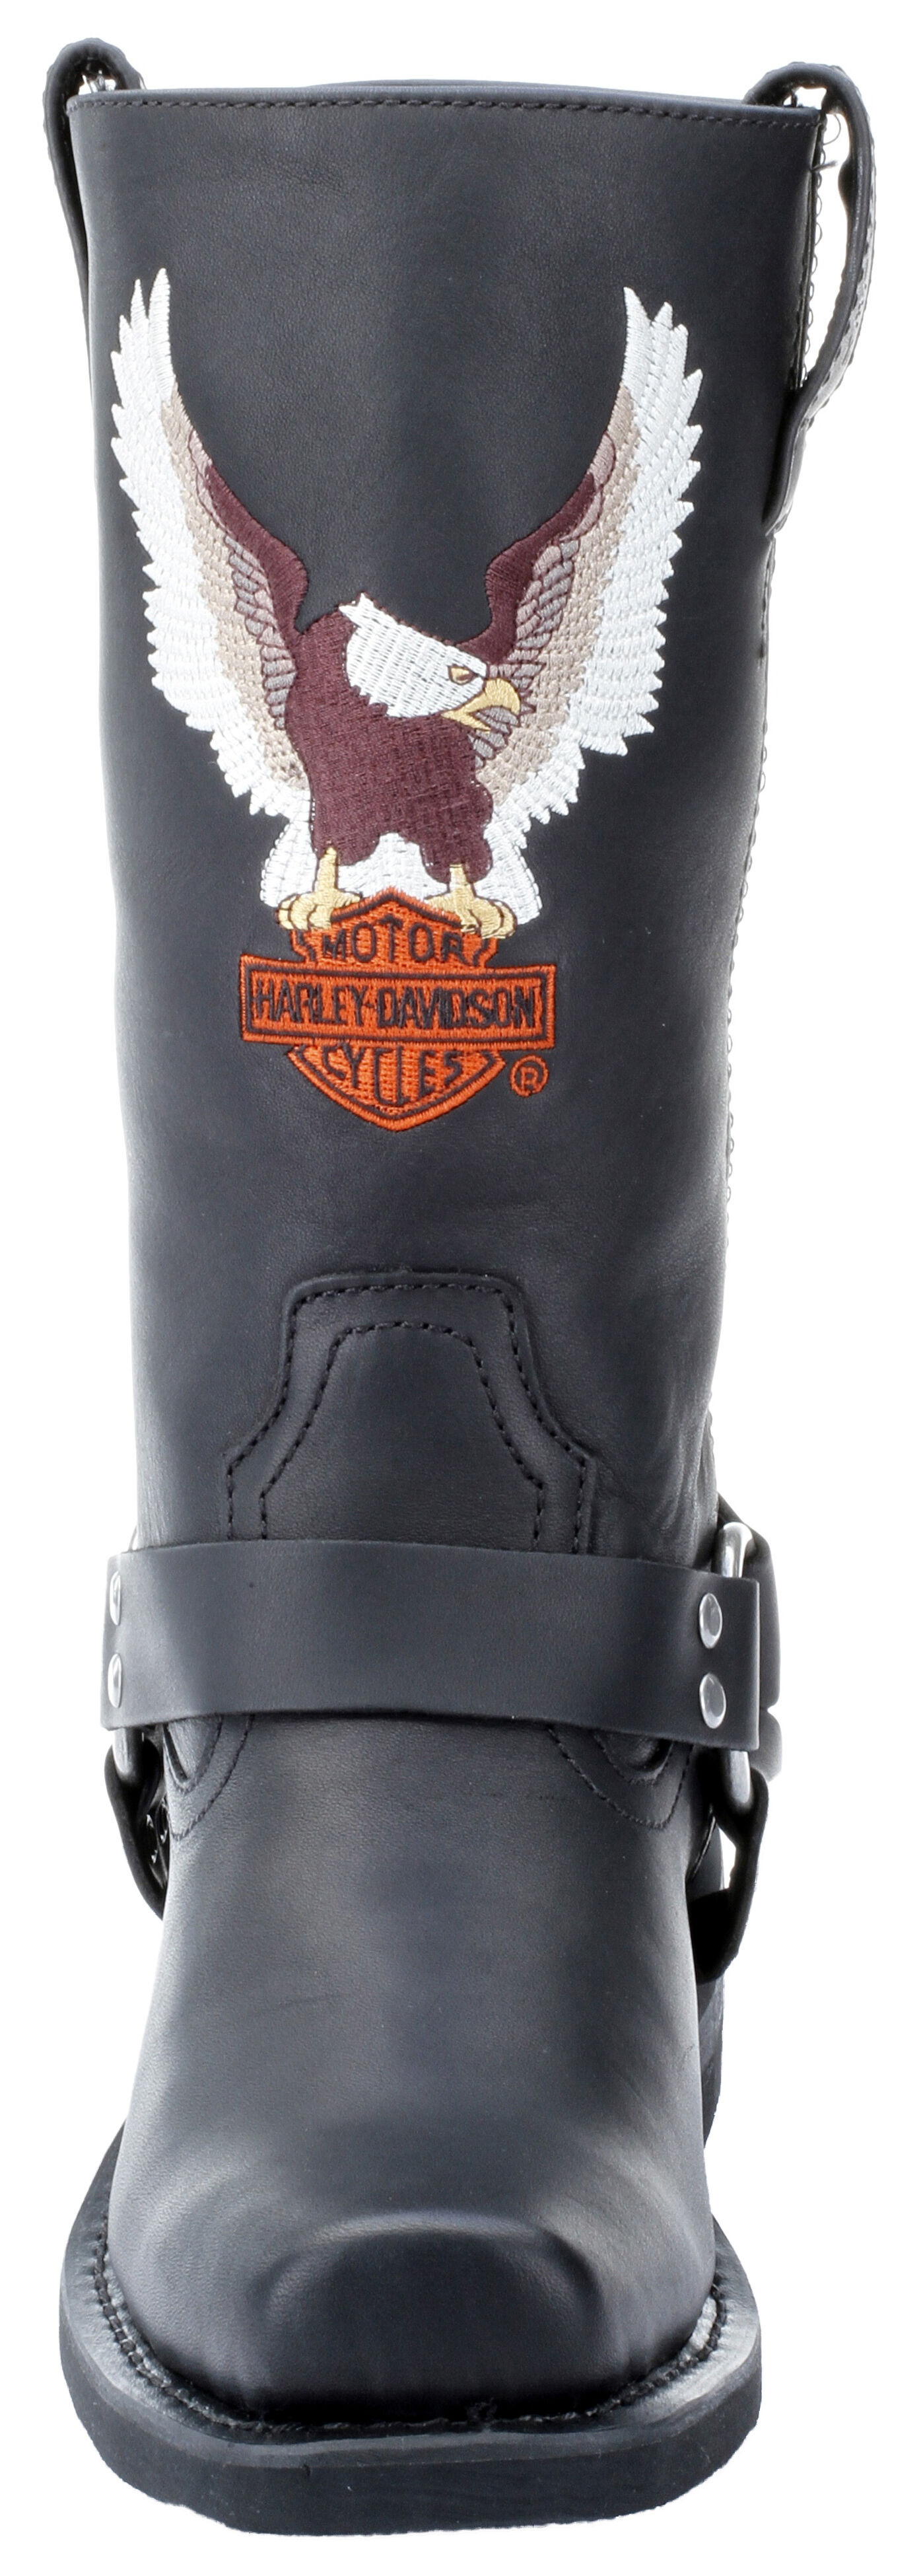 Harley Davidson Mens Boots Clearance Online Store Up To 53 Off